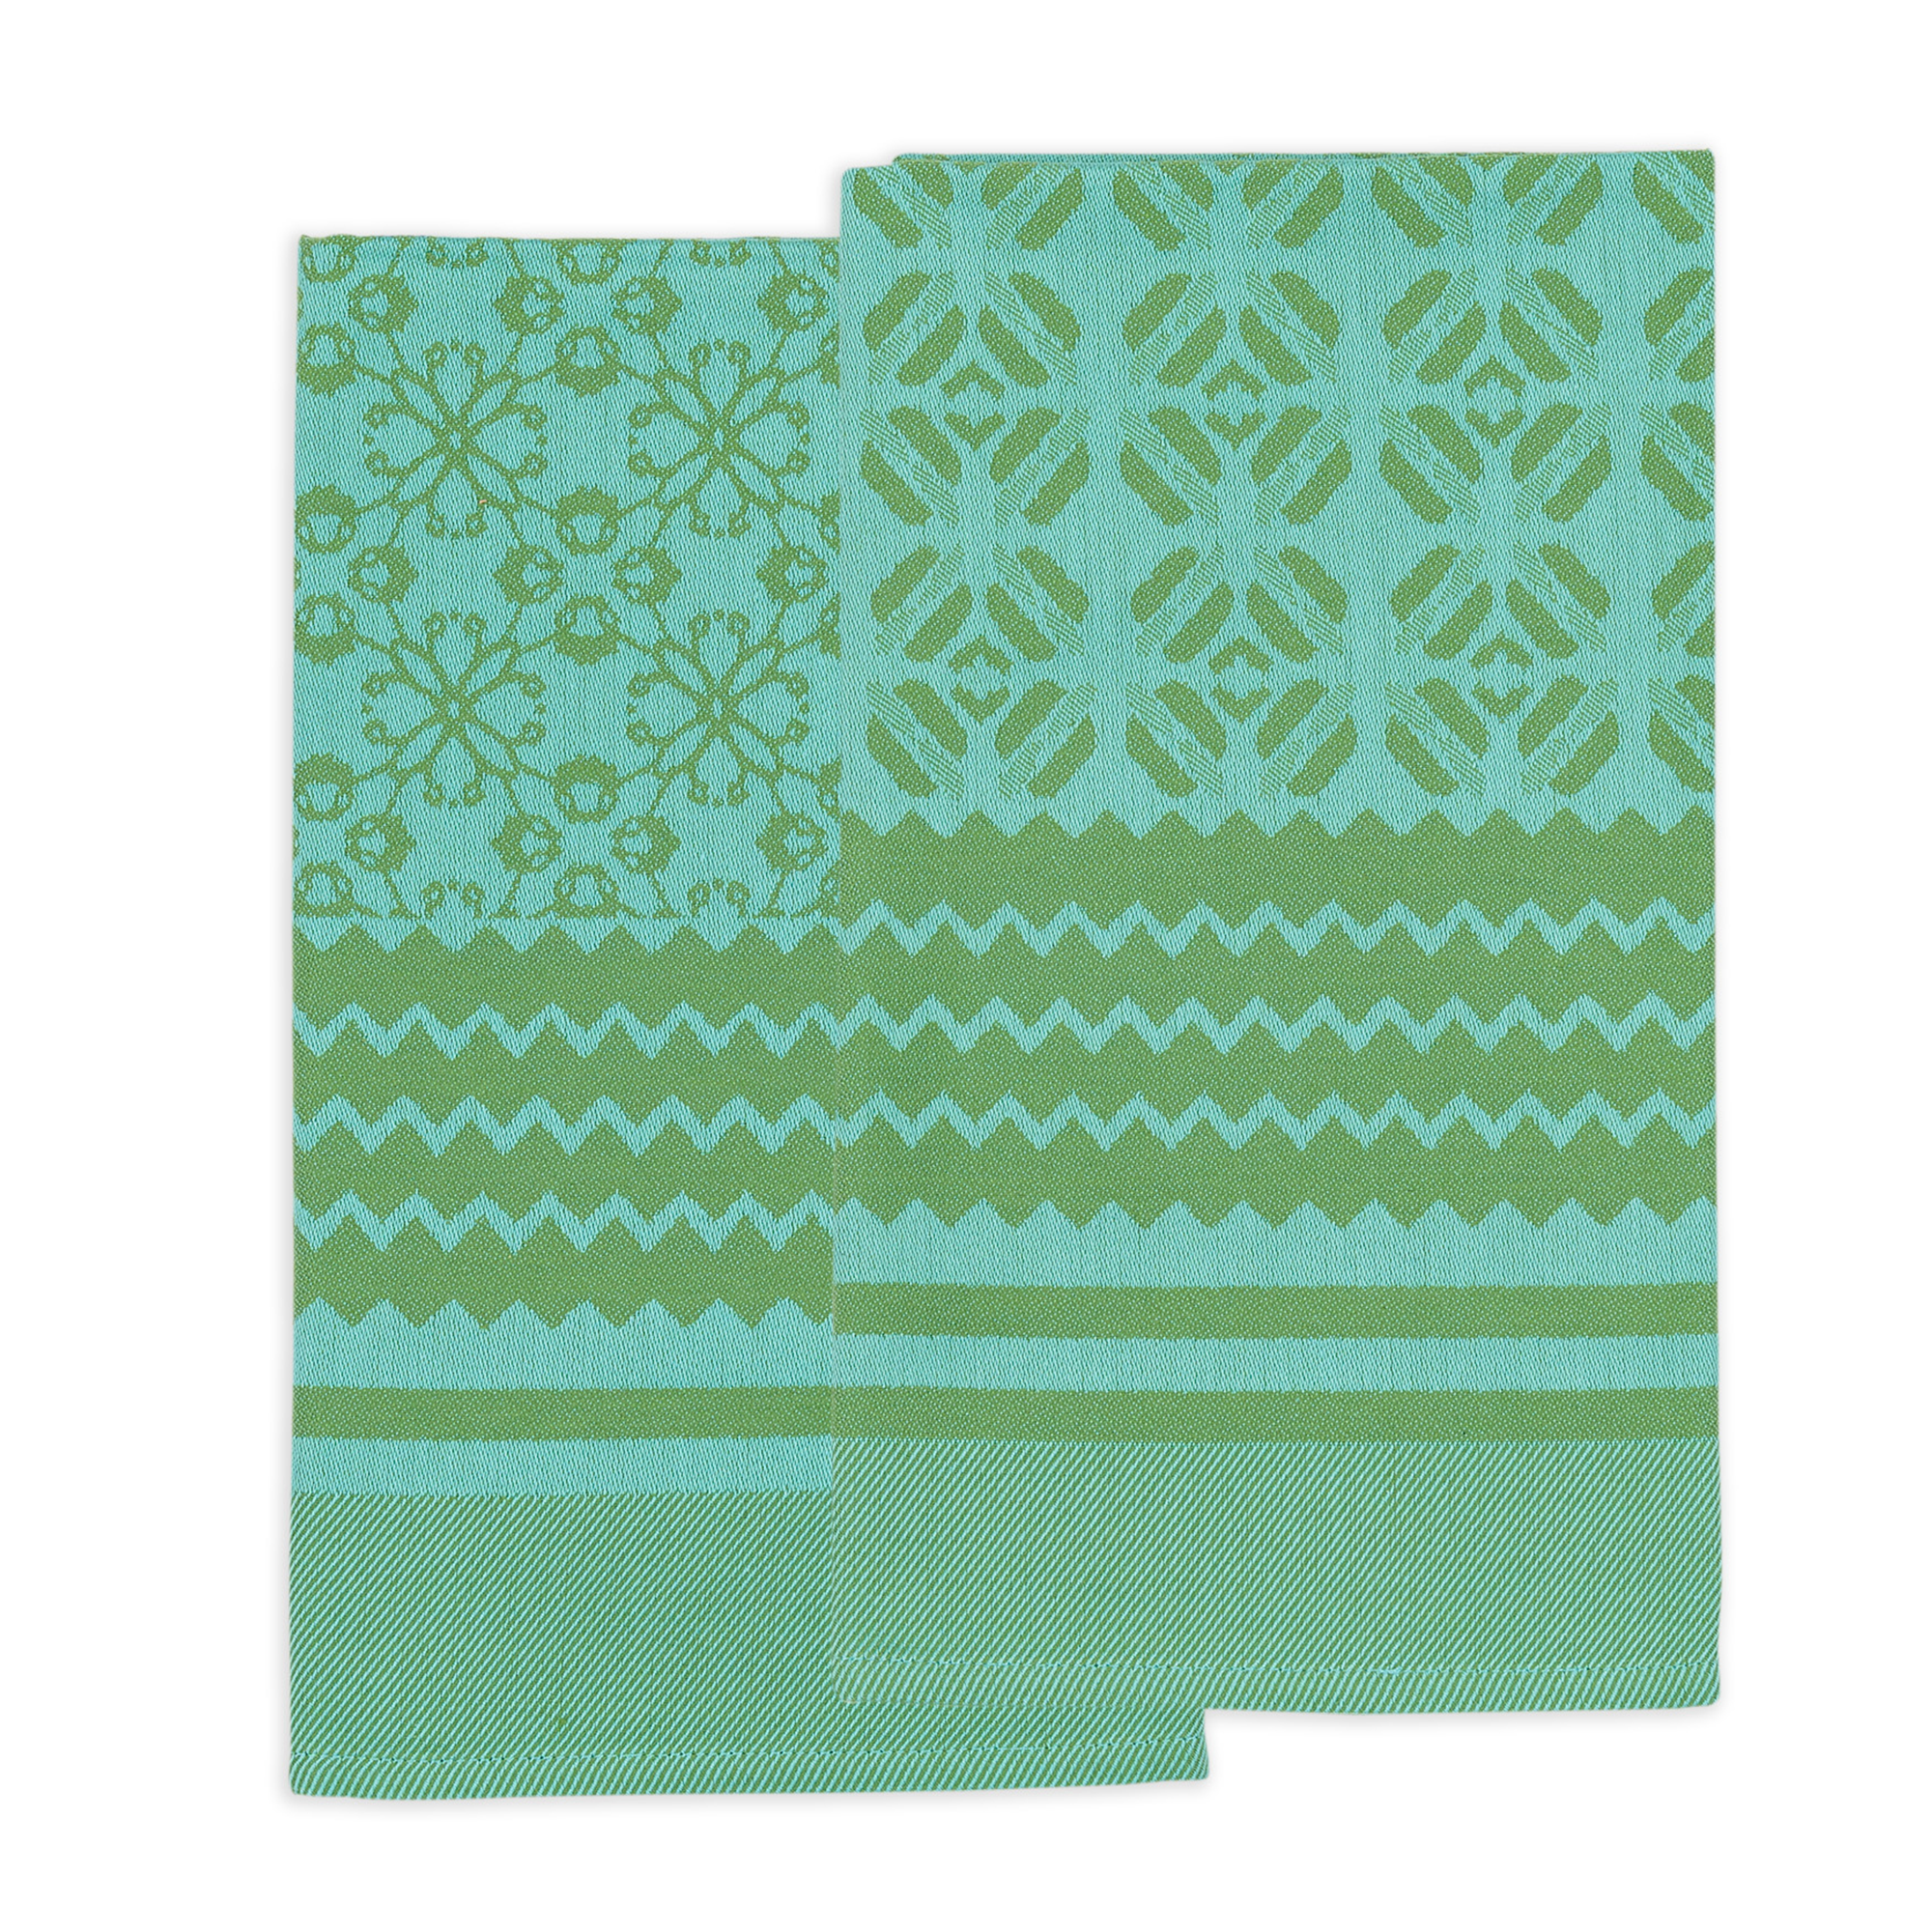 Unique tea towels inspired by Africa's rich culture, jacquard woven from 100% African cotton. Featuring diverse African patterns including floral designs in light and dark green, these dish towels add vibrancy to your kitchen and intrigue guests.